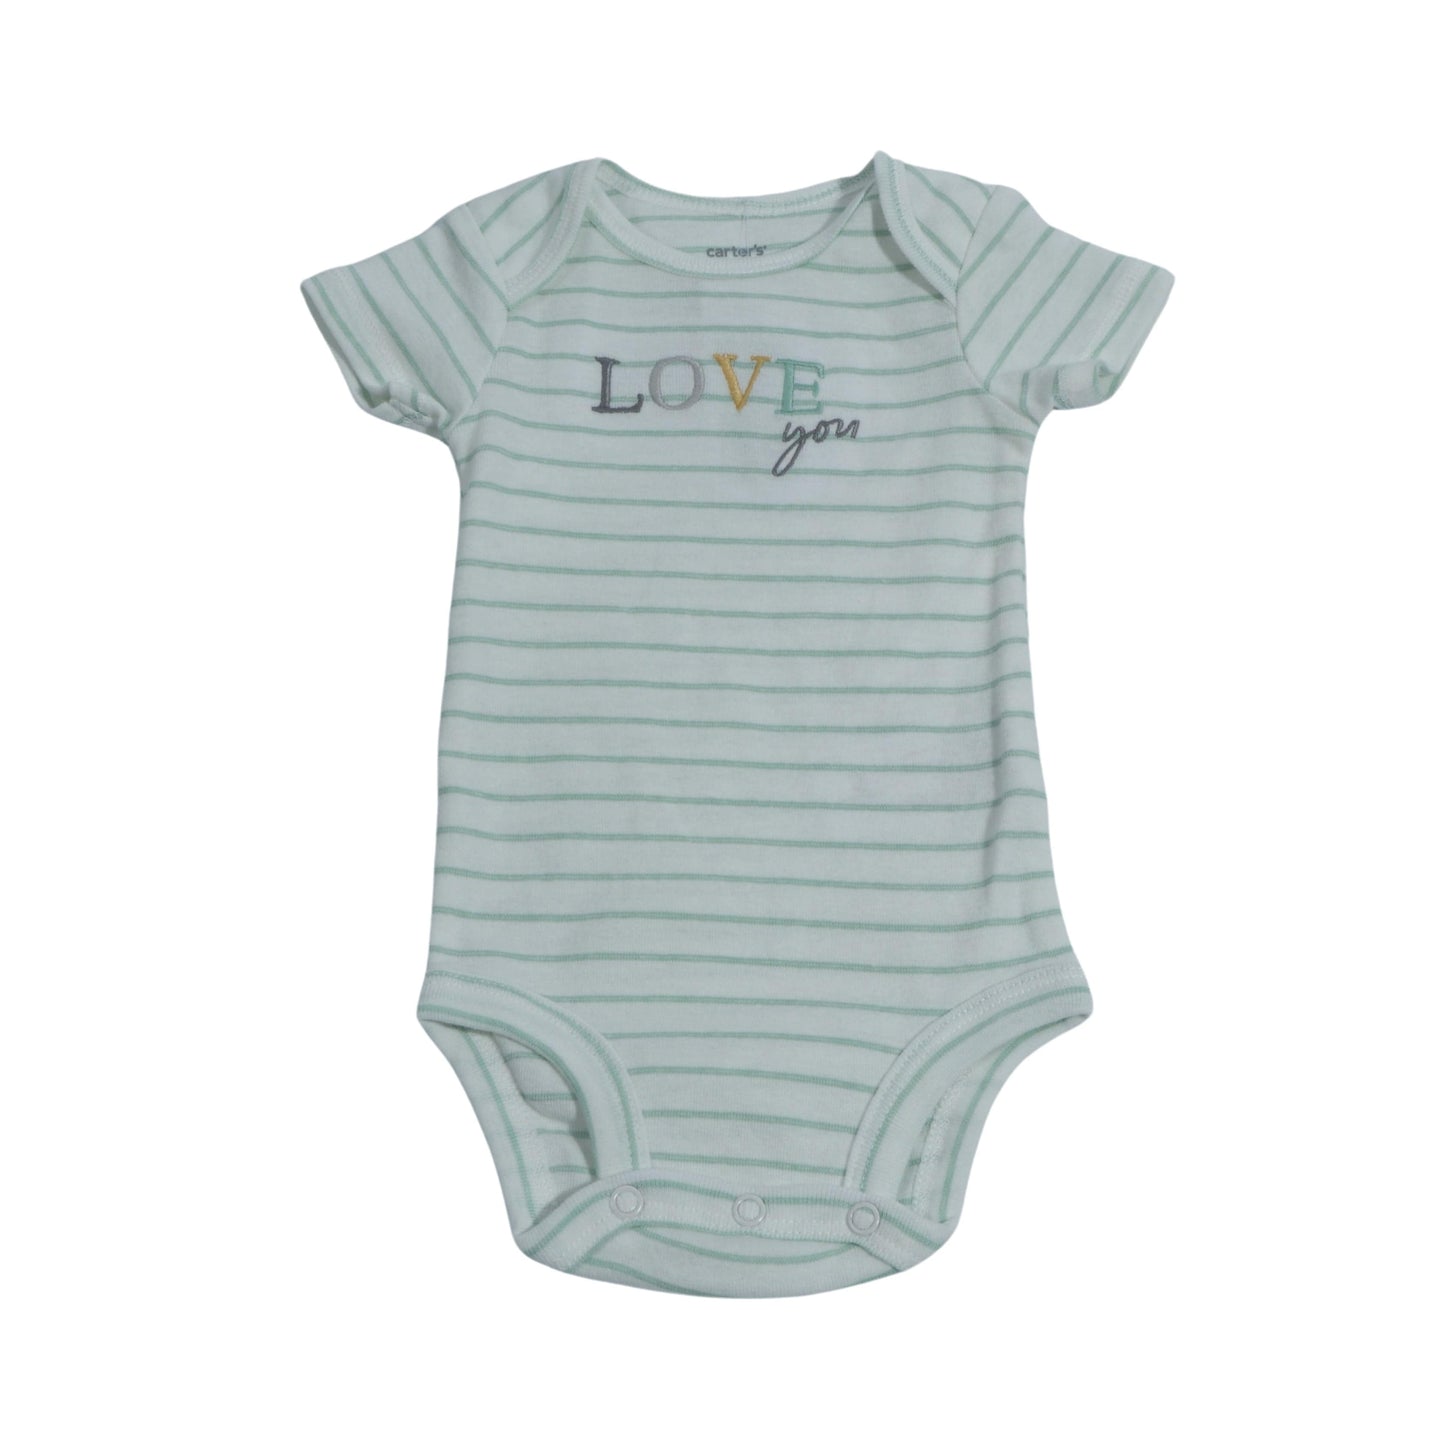 CARTER'S Baby Boy 3 Month / Multi-Color CARTER'S - Baby - Front Love You Embroidery Bodysuit